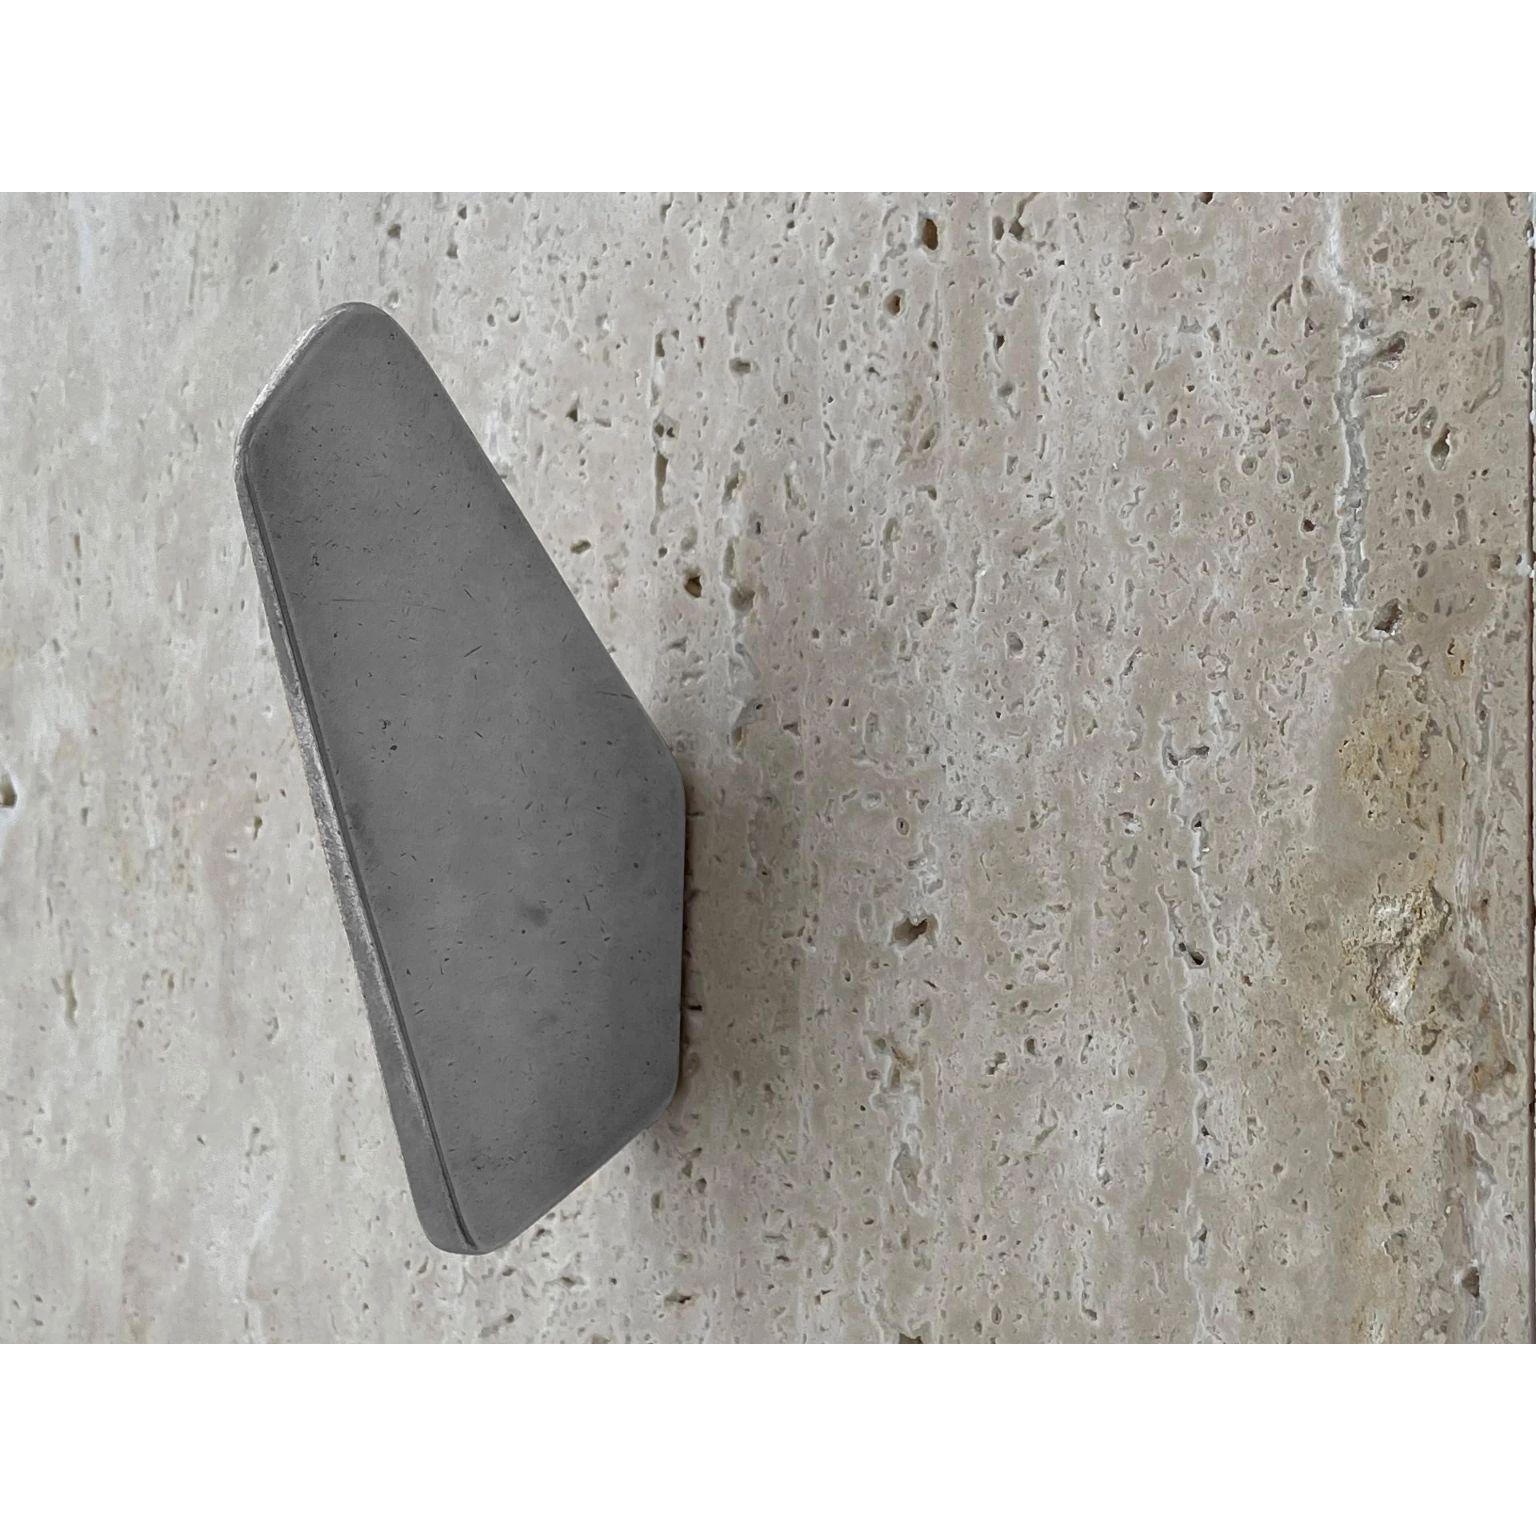 Aluminium Gio Hook by Henry Wilson
Dimensions: W 2 x D 8 x H 12 cm
Materials: Aluminium 

The Gio Hook is sand cast in Aluminium. Named after Signor Ponti, forever an inspiration.
Our Hooks are manufactured in small batches so slight variations will